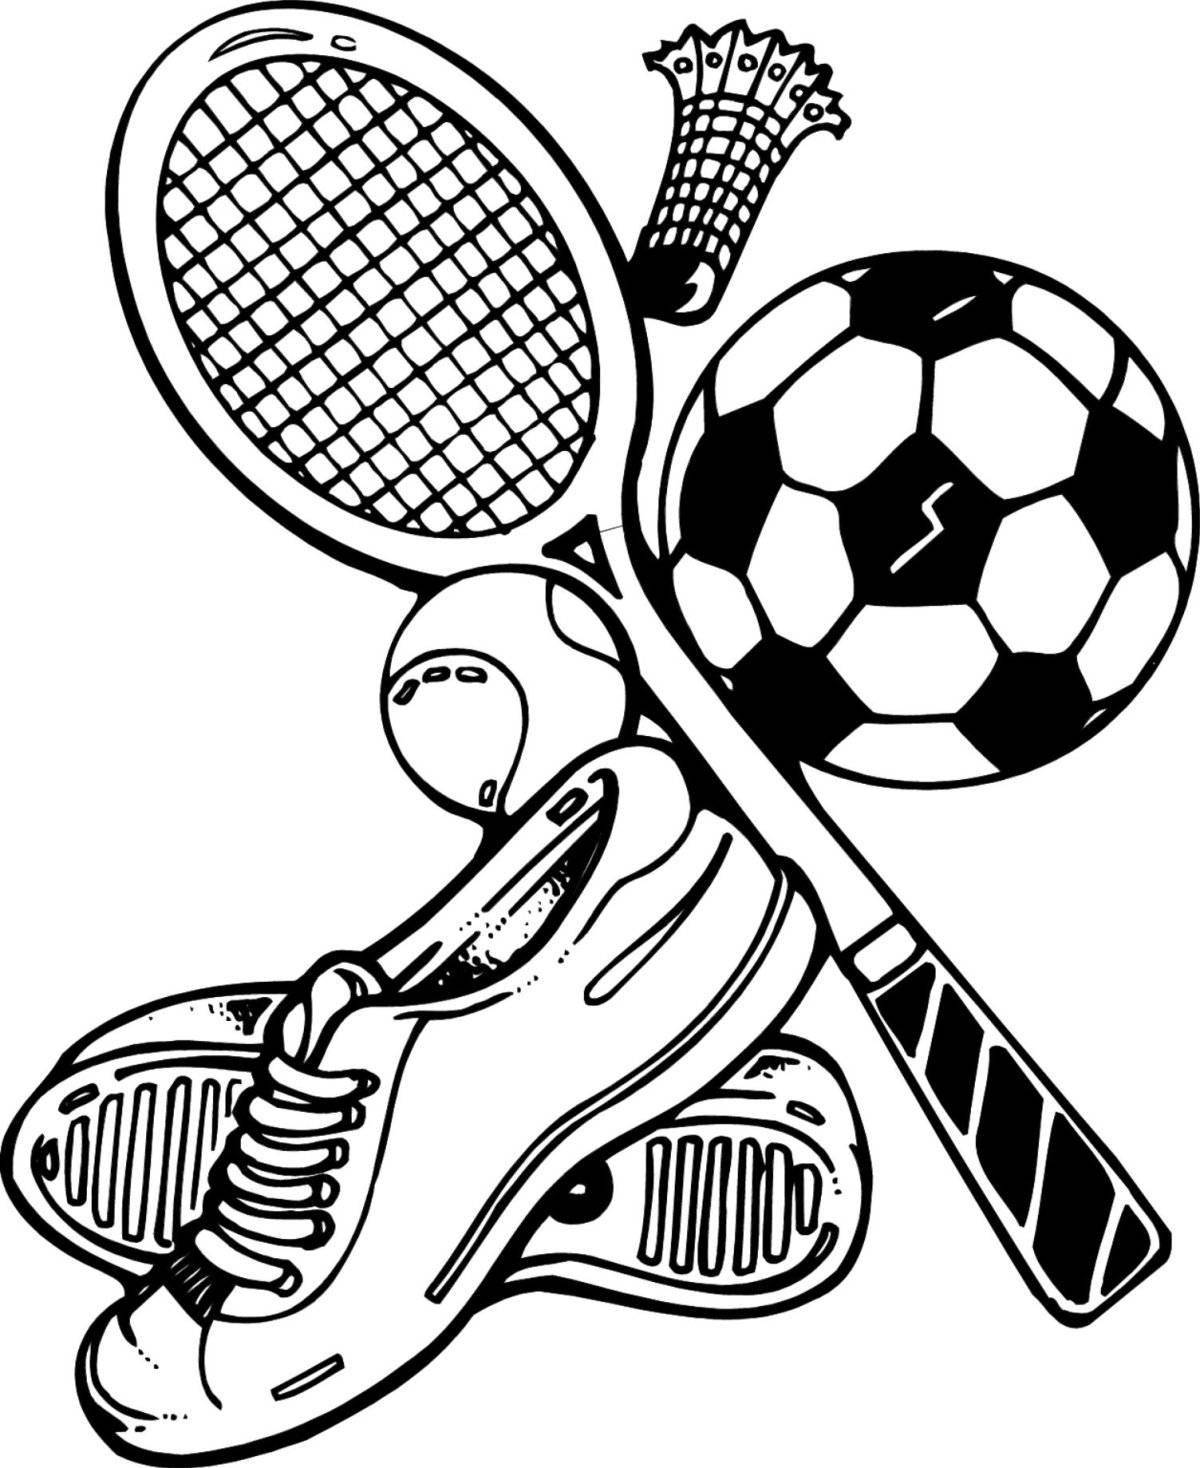 Coloring of sports equipment